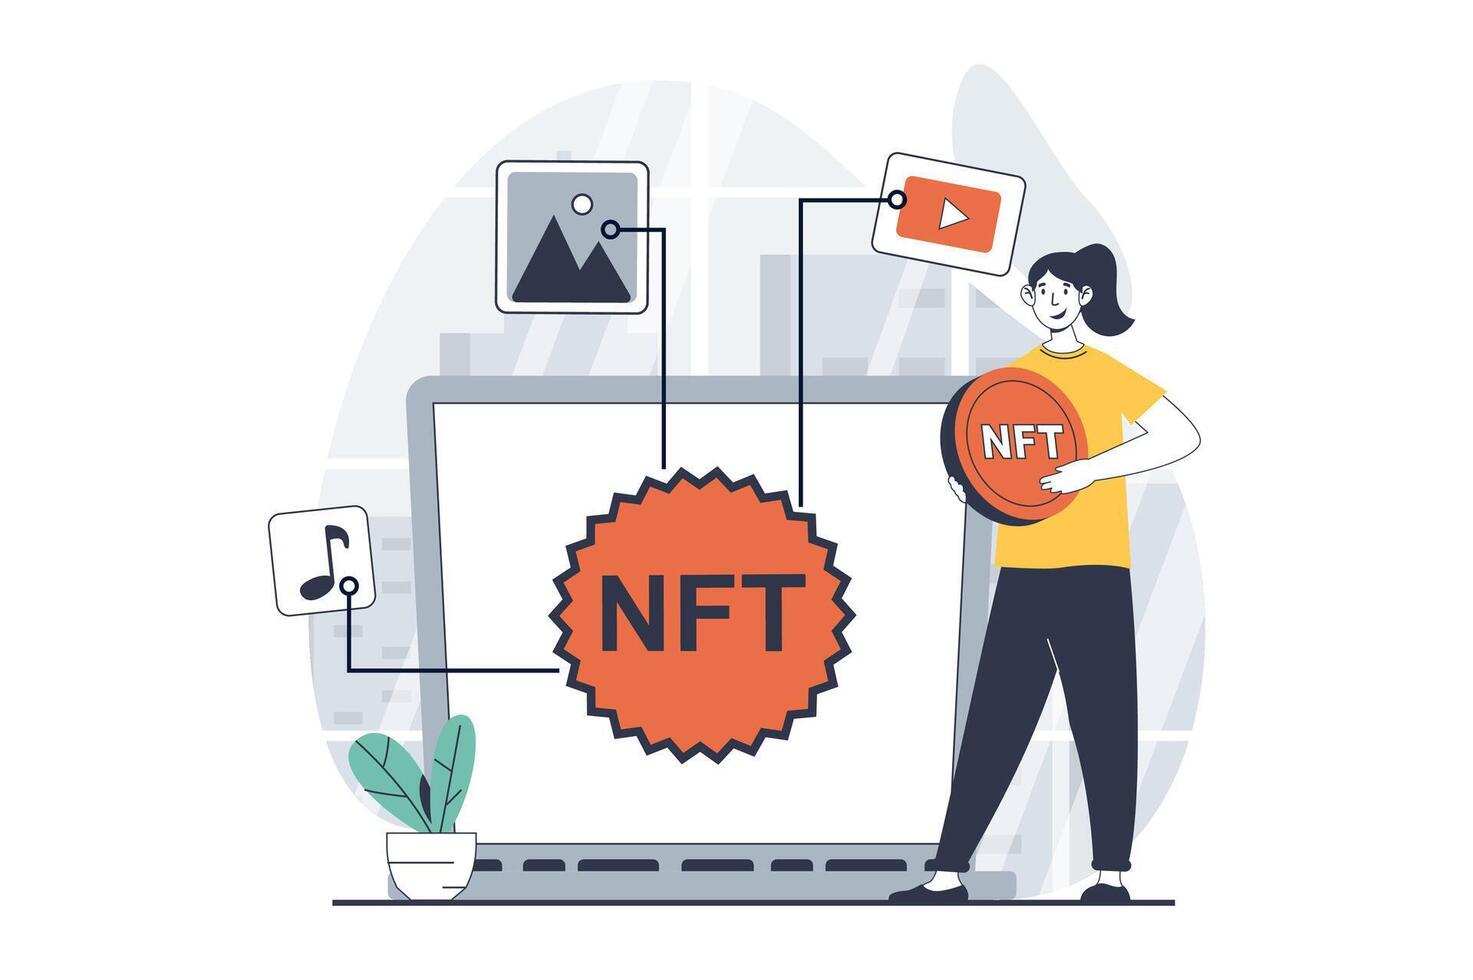 NFT token concept with people scene in flat design for web. Woman creating unique tokens for collectible artwork in virtual gallery. Vector illustration for social media banner, marketing material.